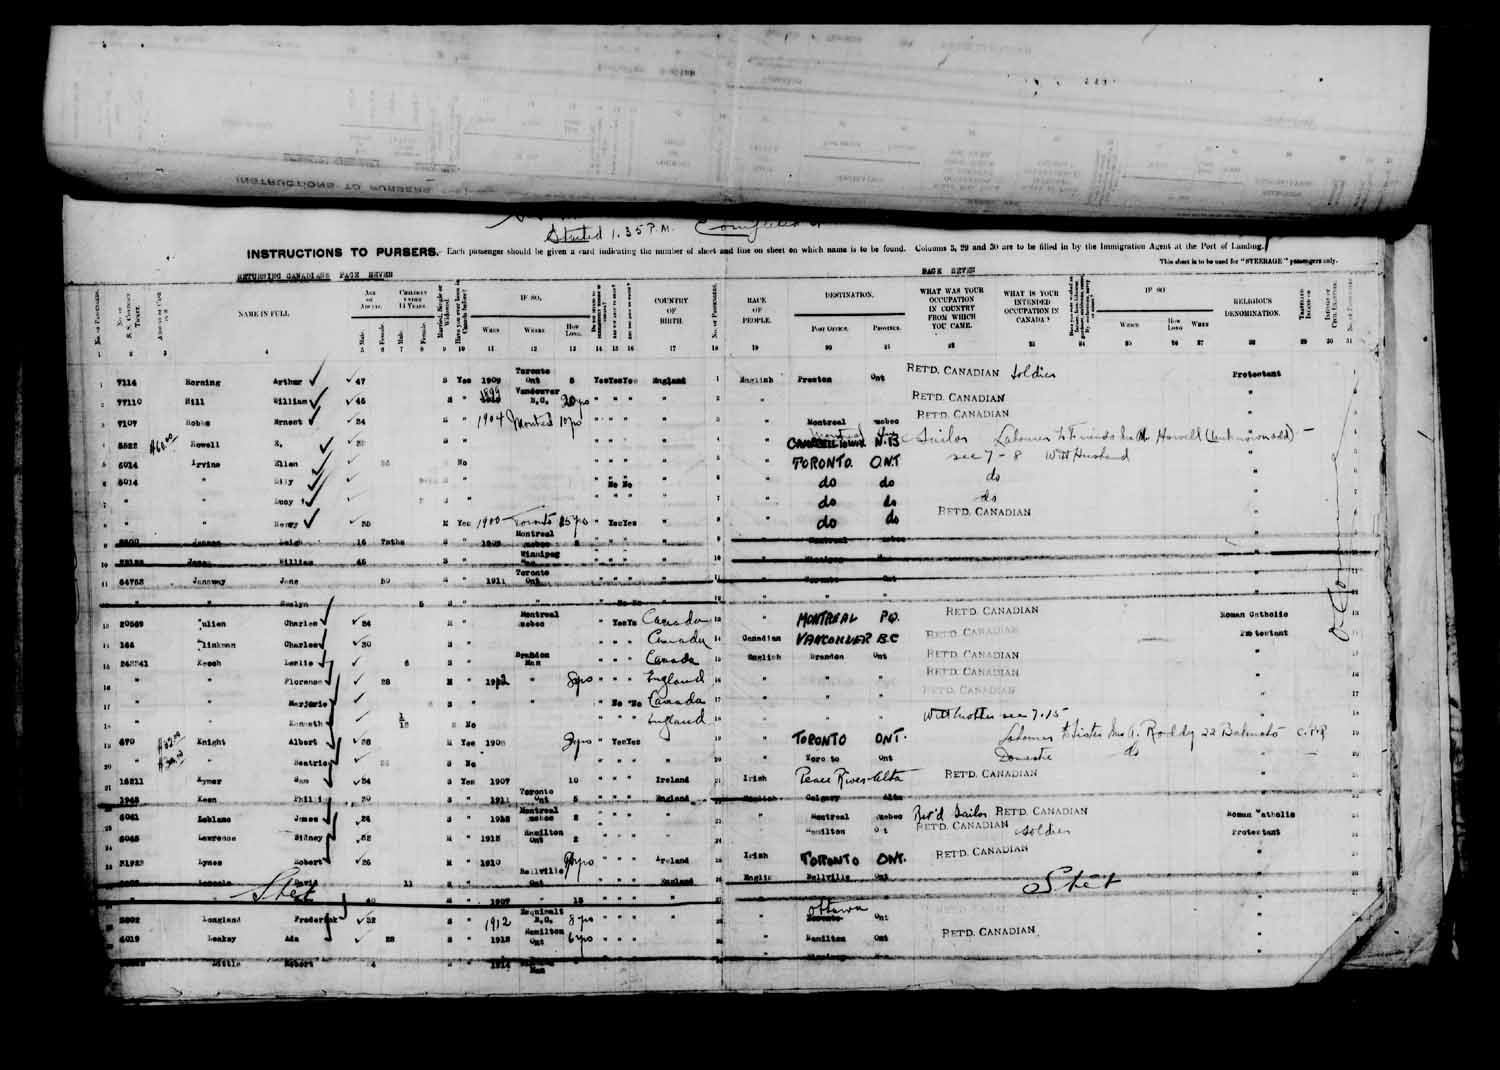 Digitized page of Passenger Lists for Image No.: e003610634